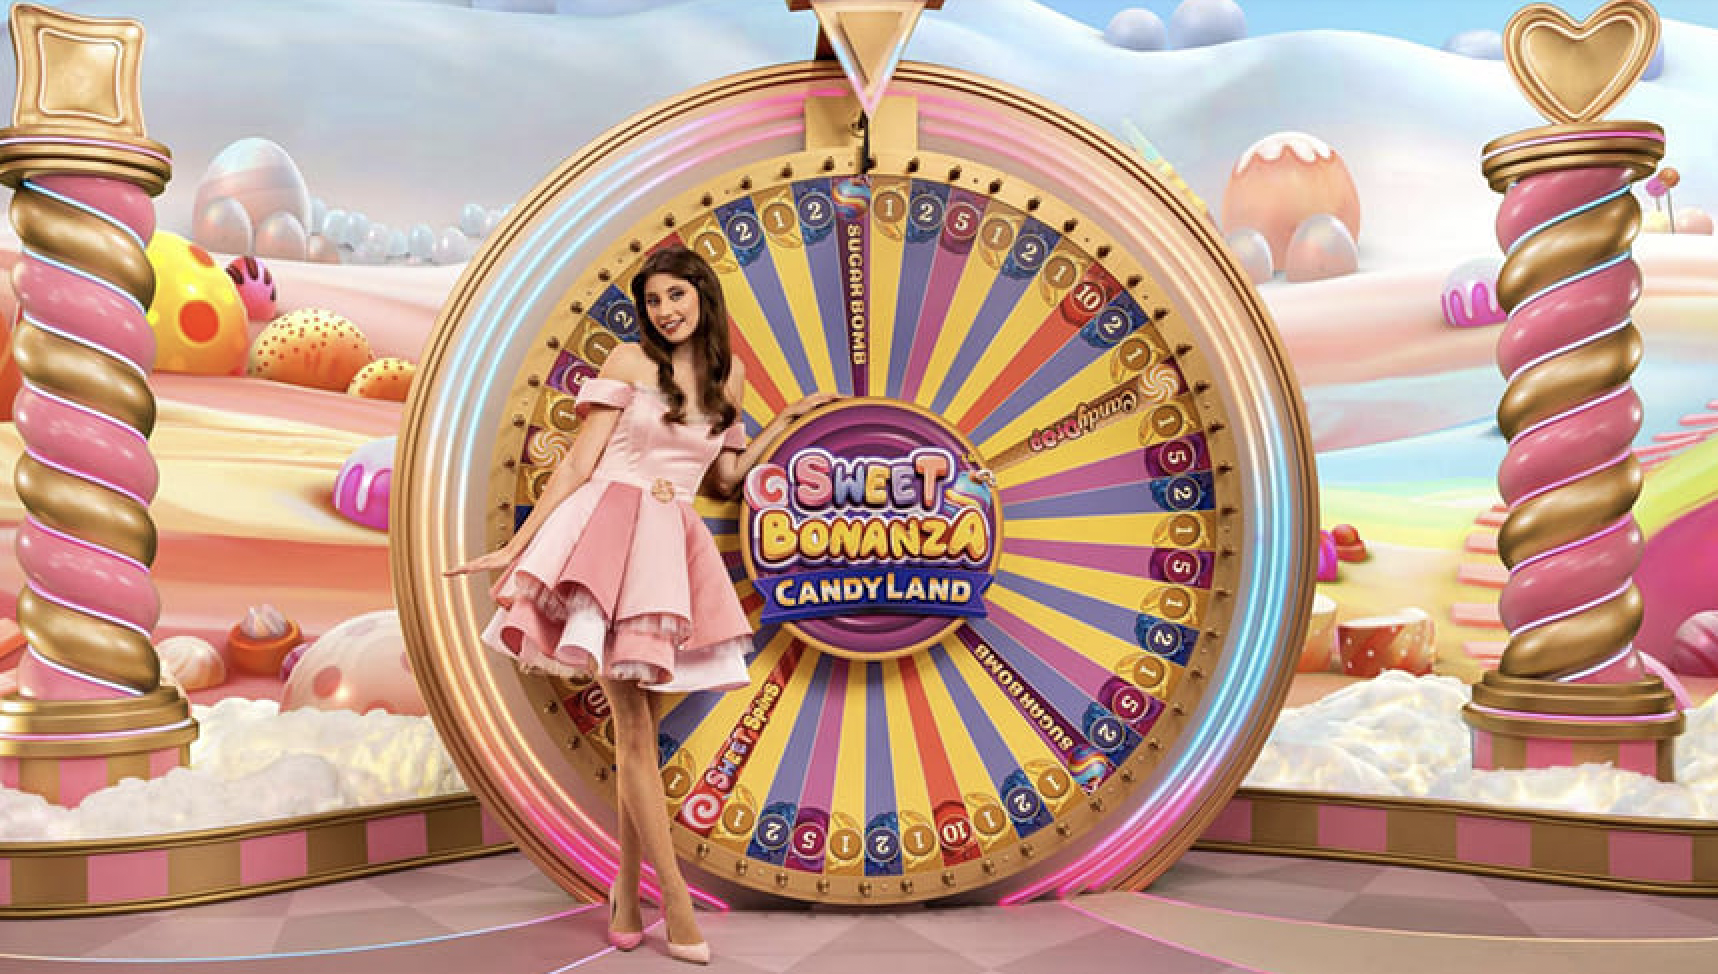 Sweet Bonanza Candyland is a Live Casino Game Provided by the Vendor Partner Pragmatic Play - GamingSoft